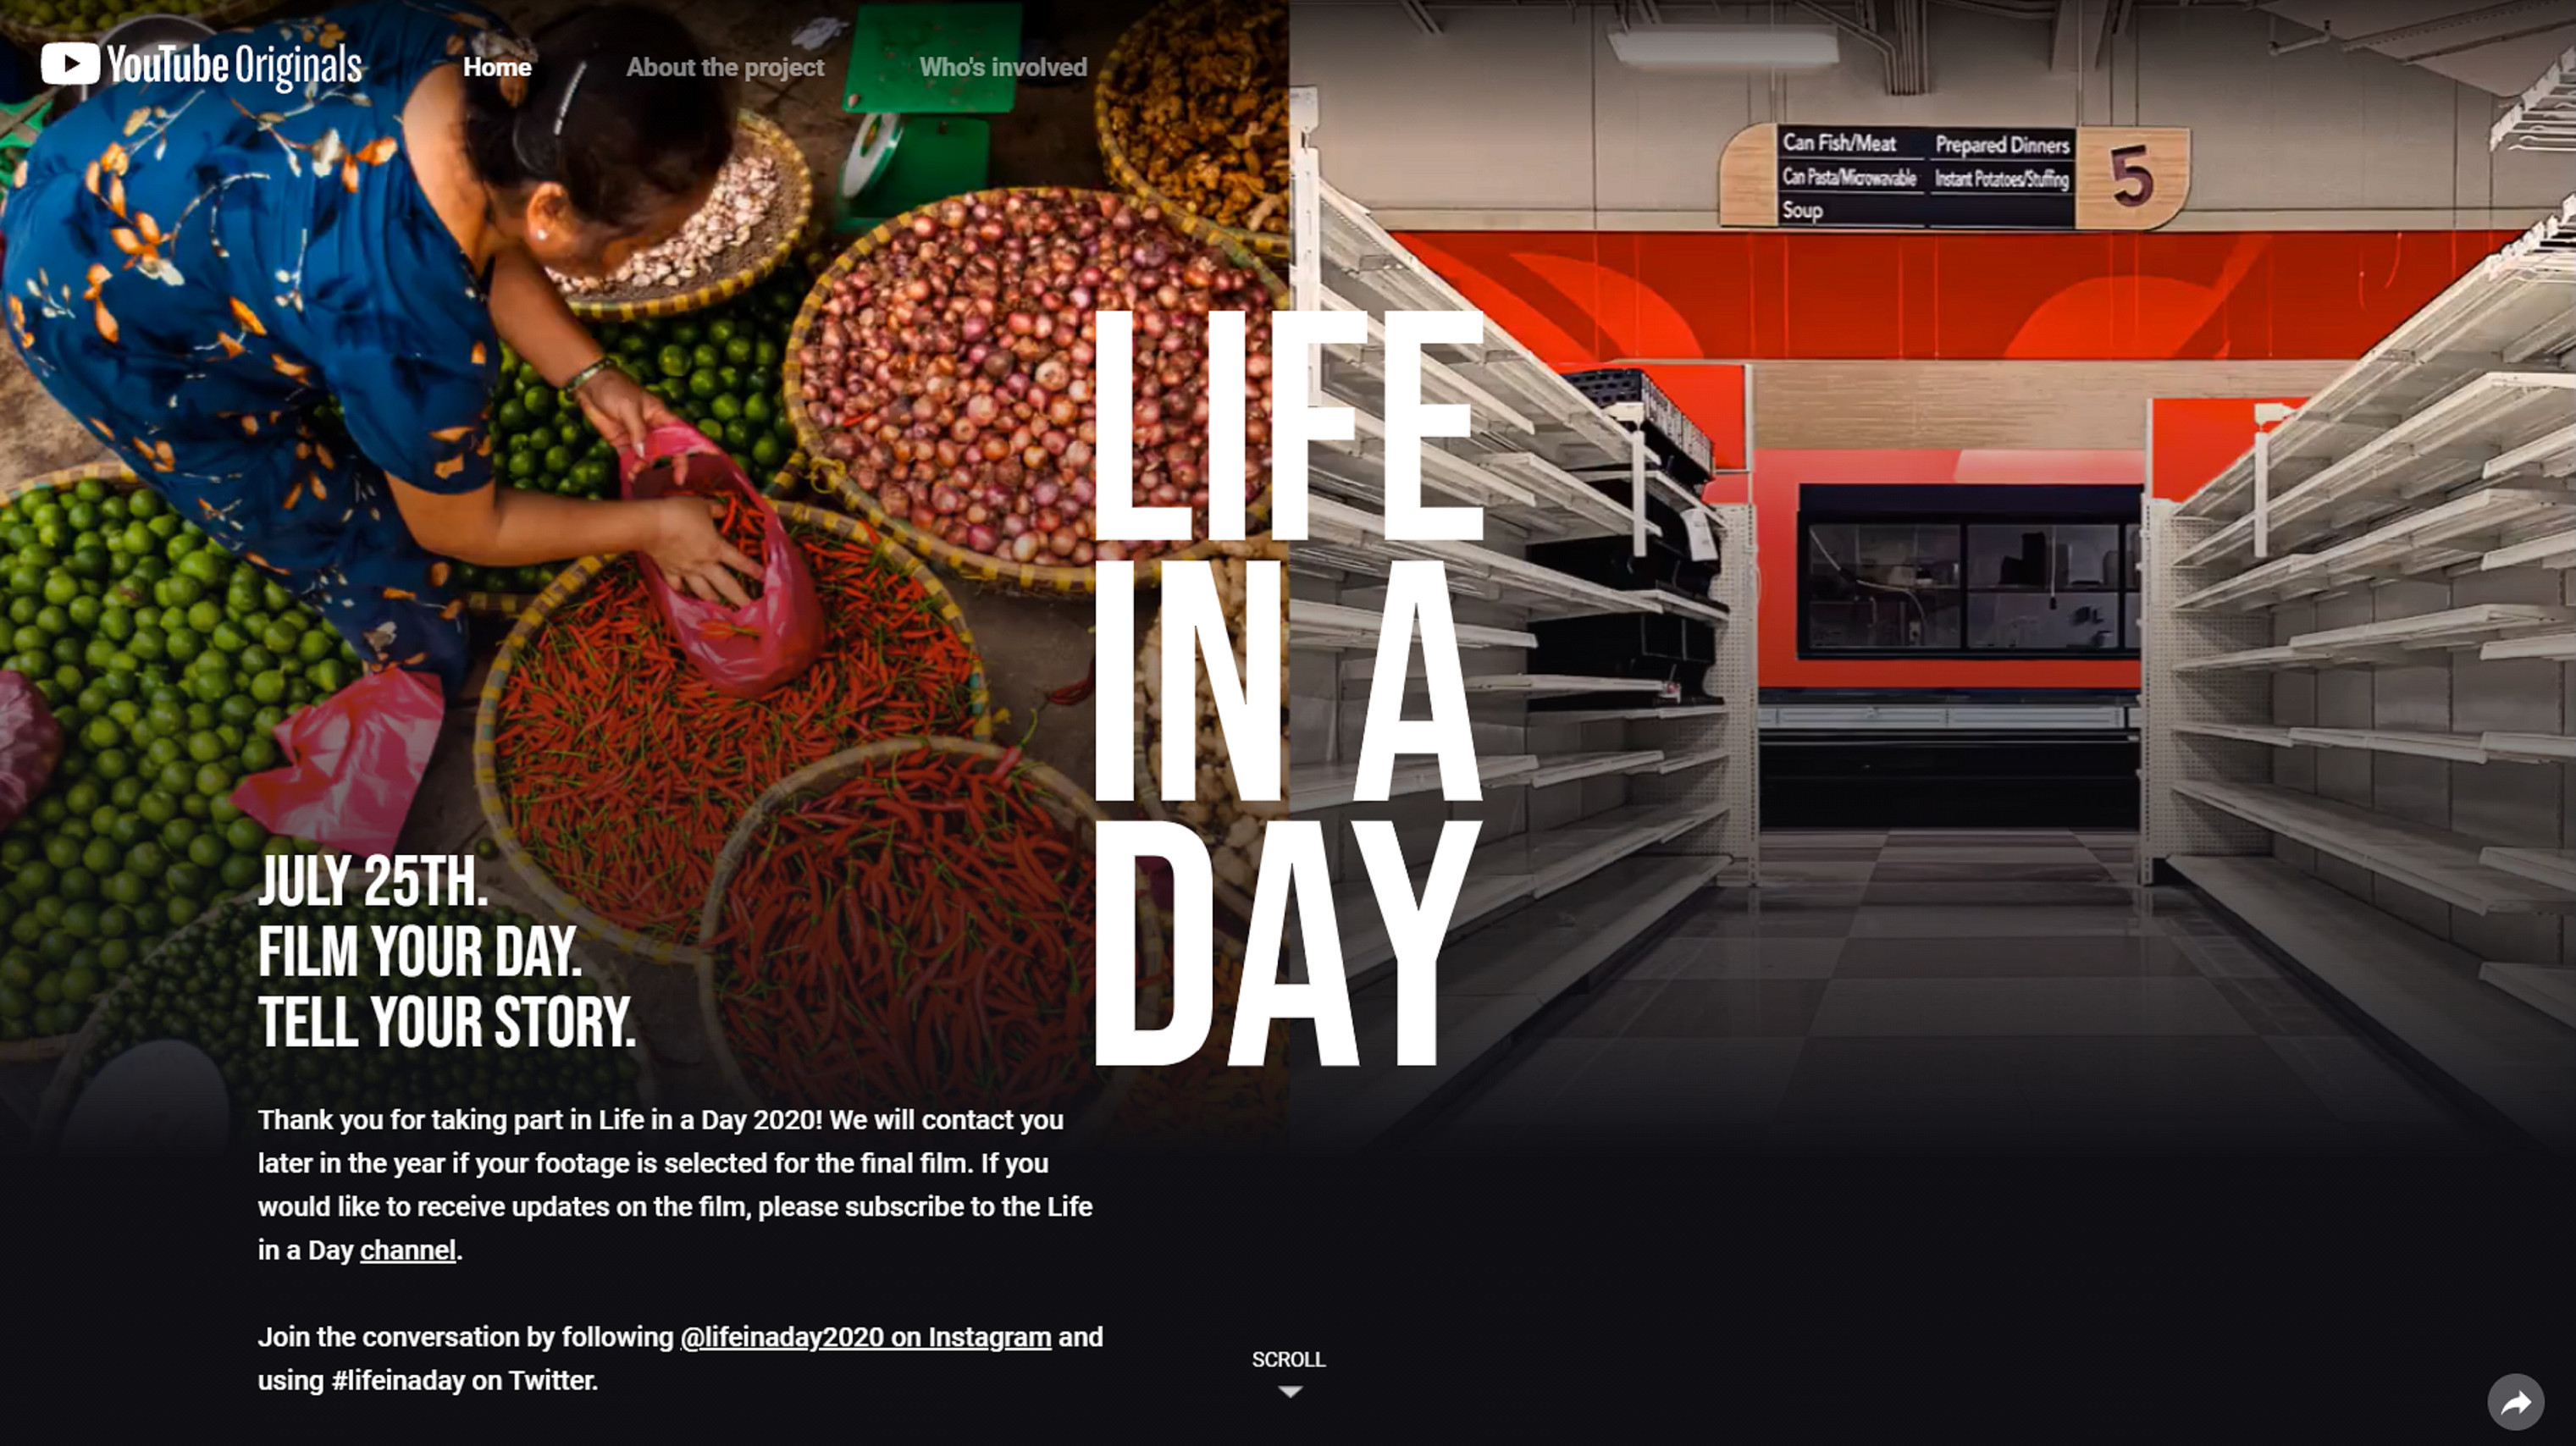 A great site that shows a day in the life of many people across the world